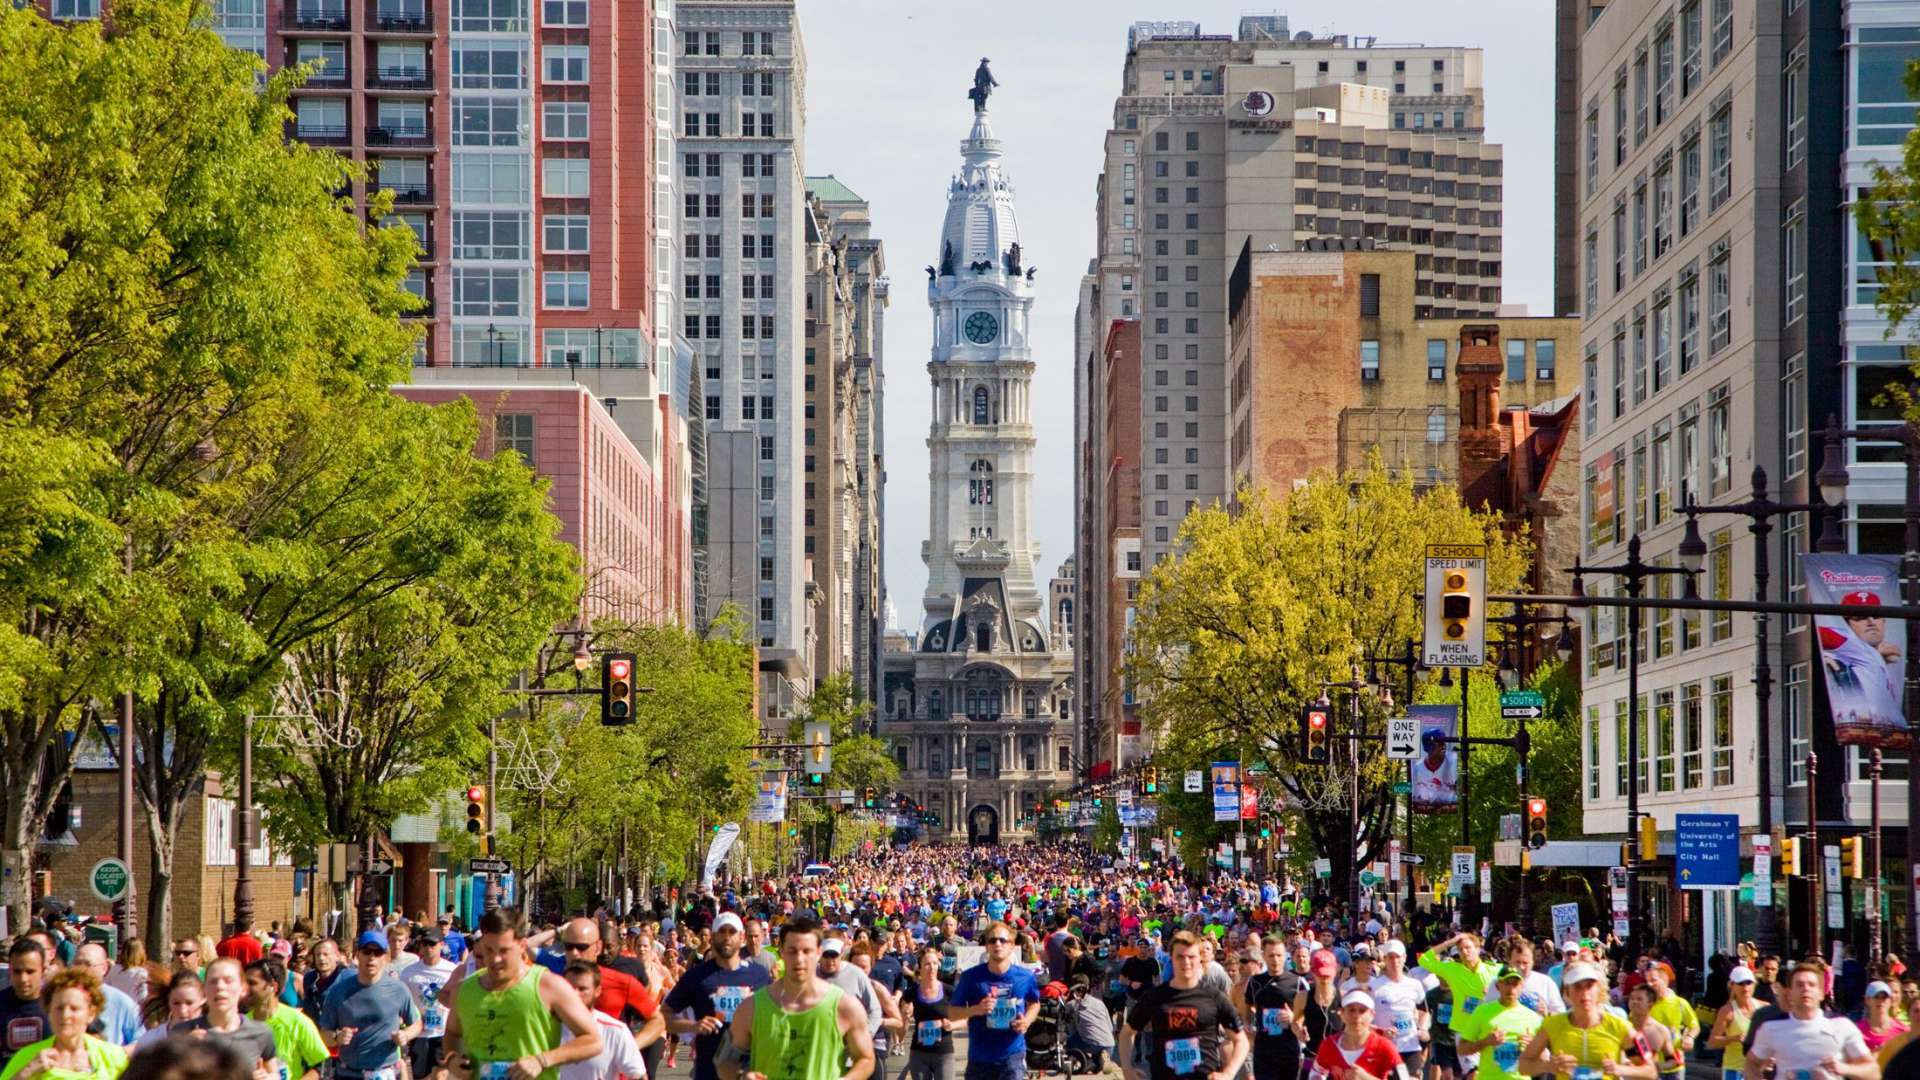 A group of runners at the Broad Street Run in Philadelphia, PA